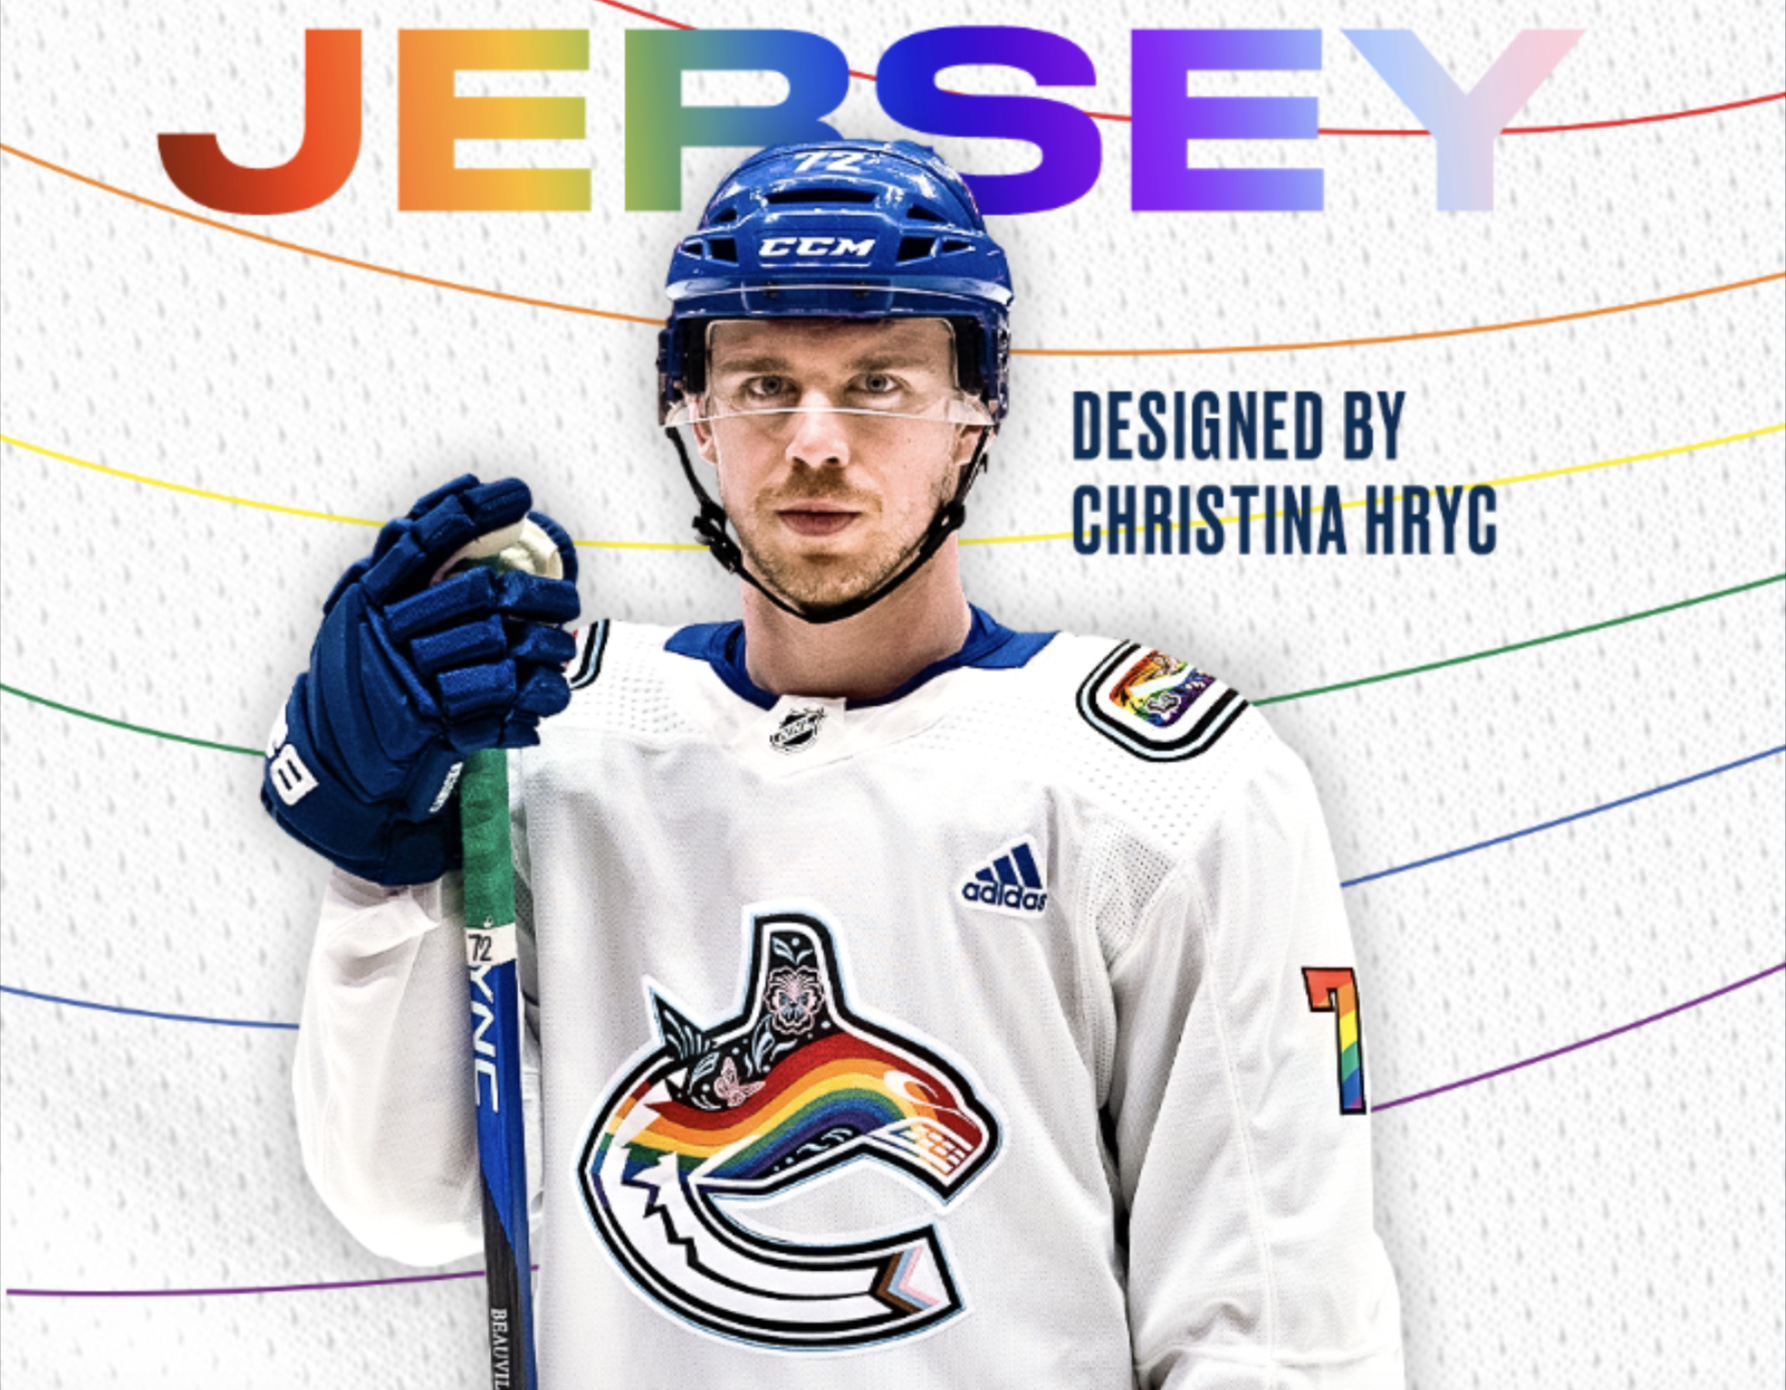 New Vancouver Canucks 2019-20 jerseys officially released